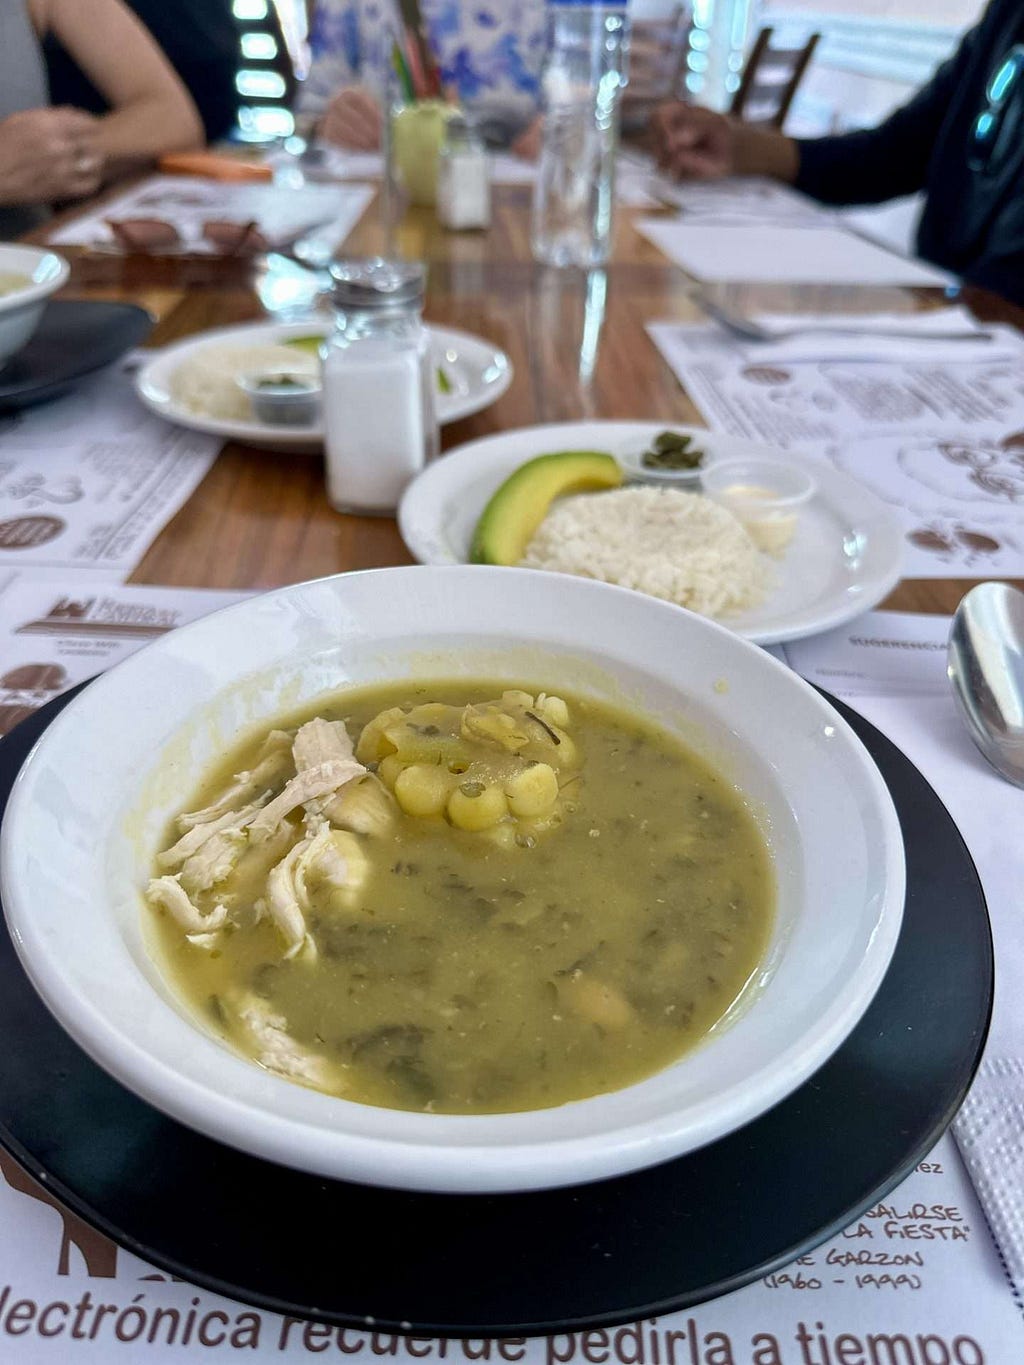 A bowl of ajiaco soup with corn on a table. Behind it, a plate with white rice, avocado slices, and a side dish of capers. Three people are seated at the table in the background.